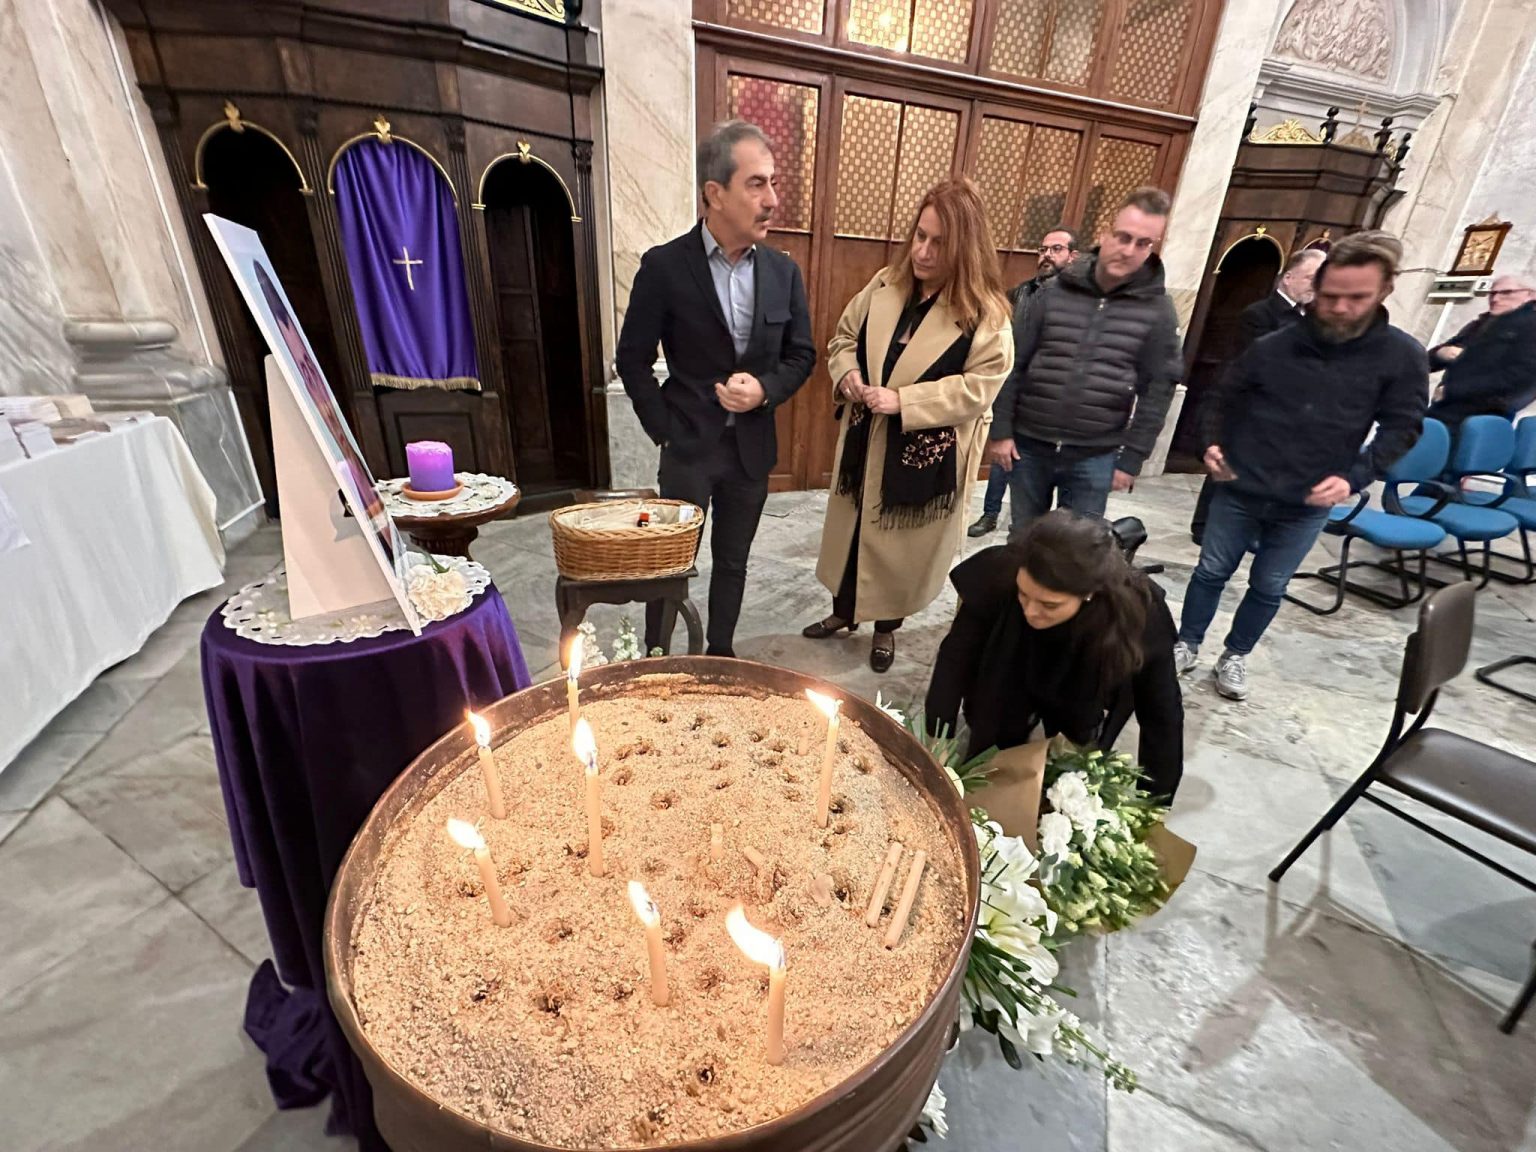 The Community of Neochorion of the Bosphorus visited the Roman Catholic Church that was attacked